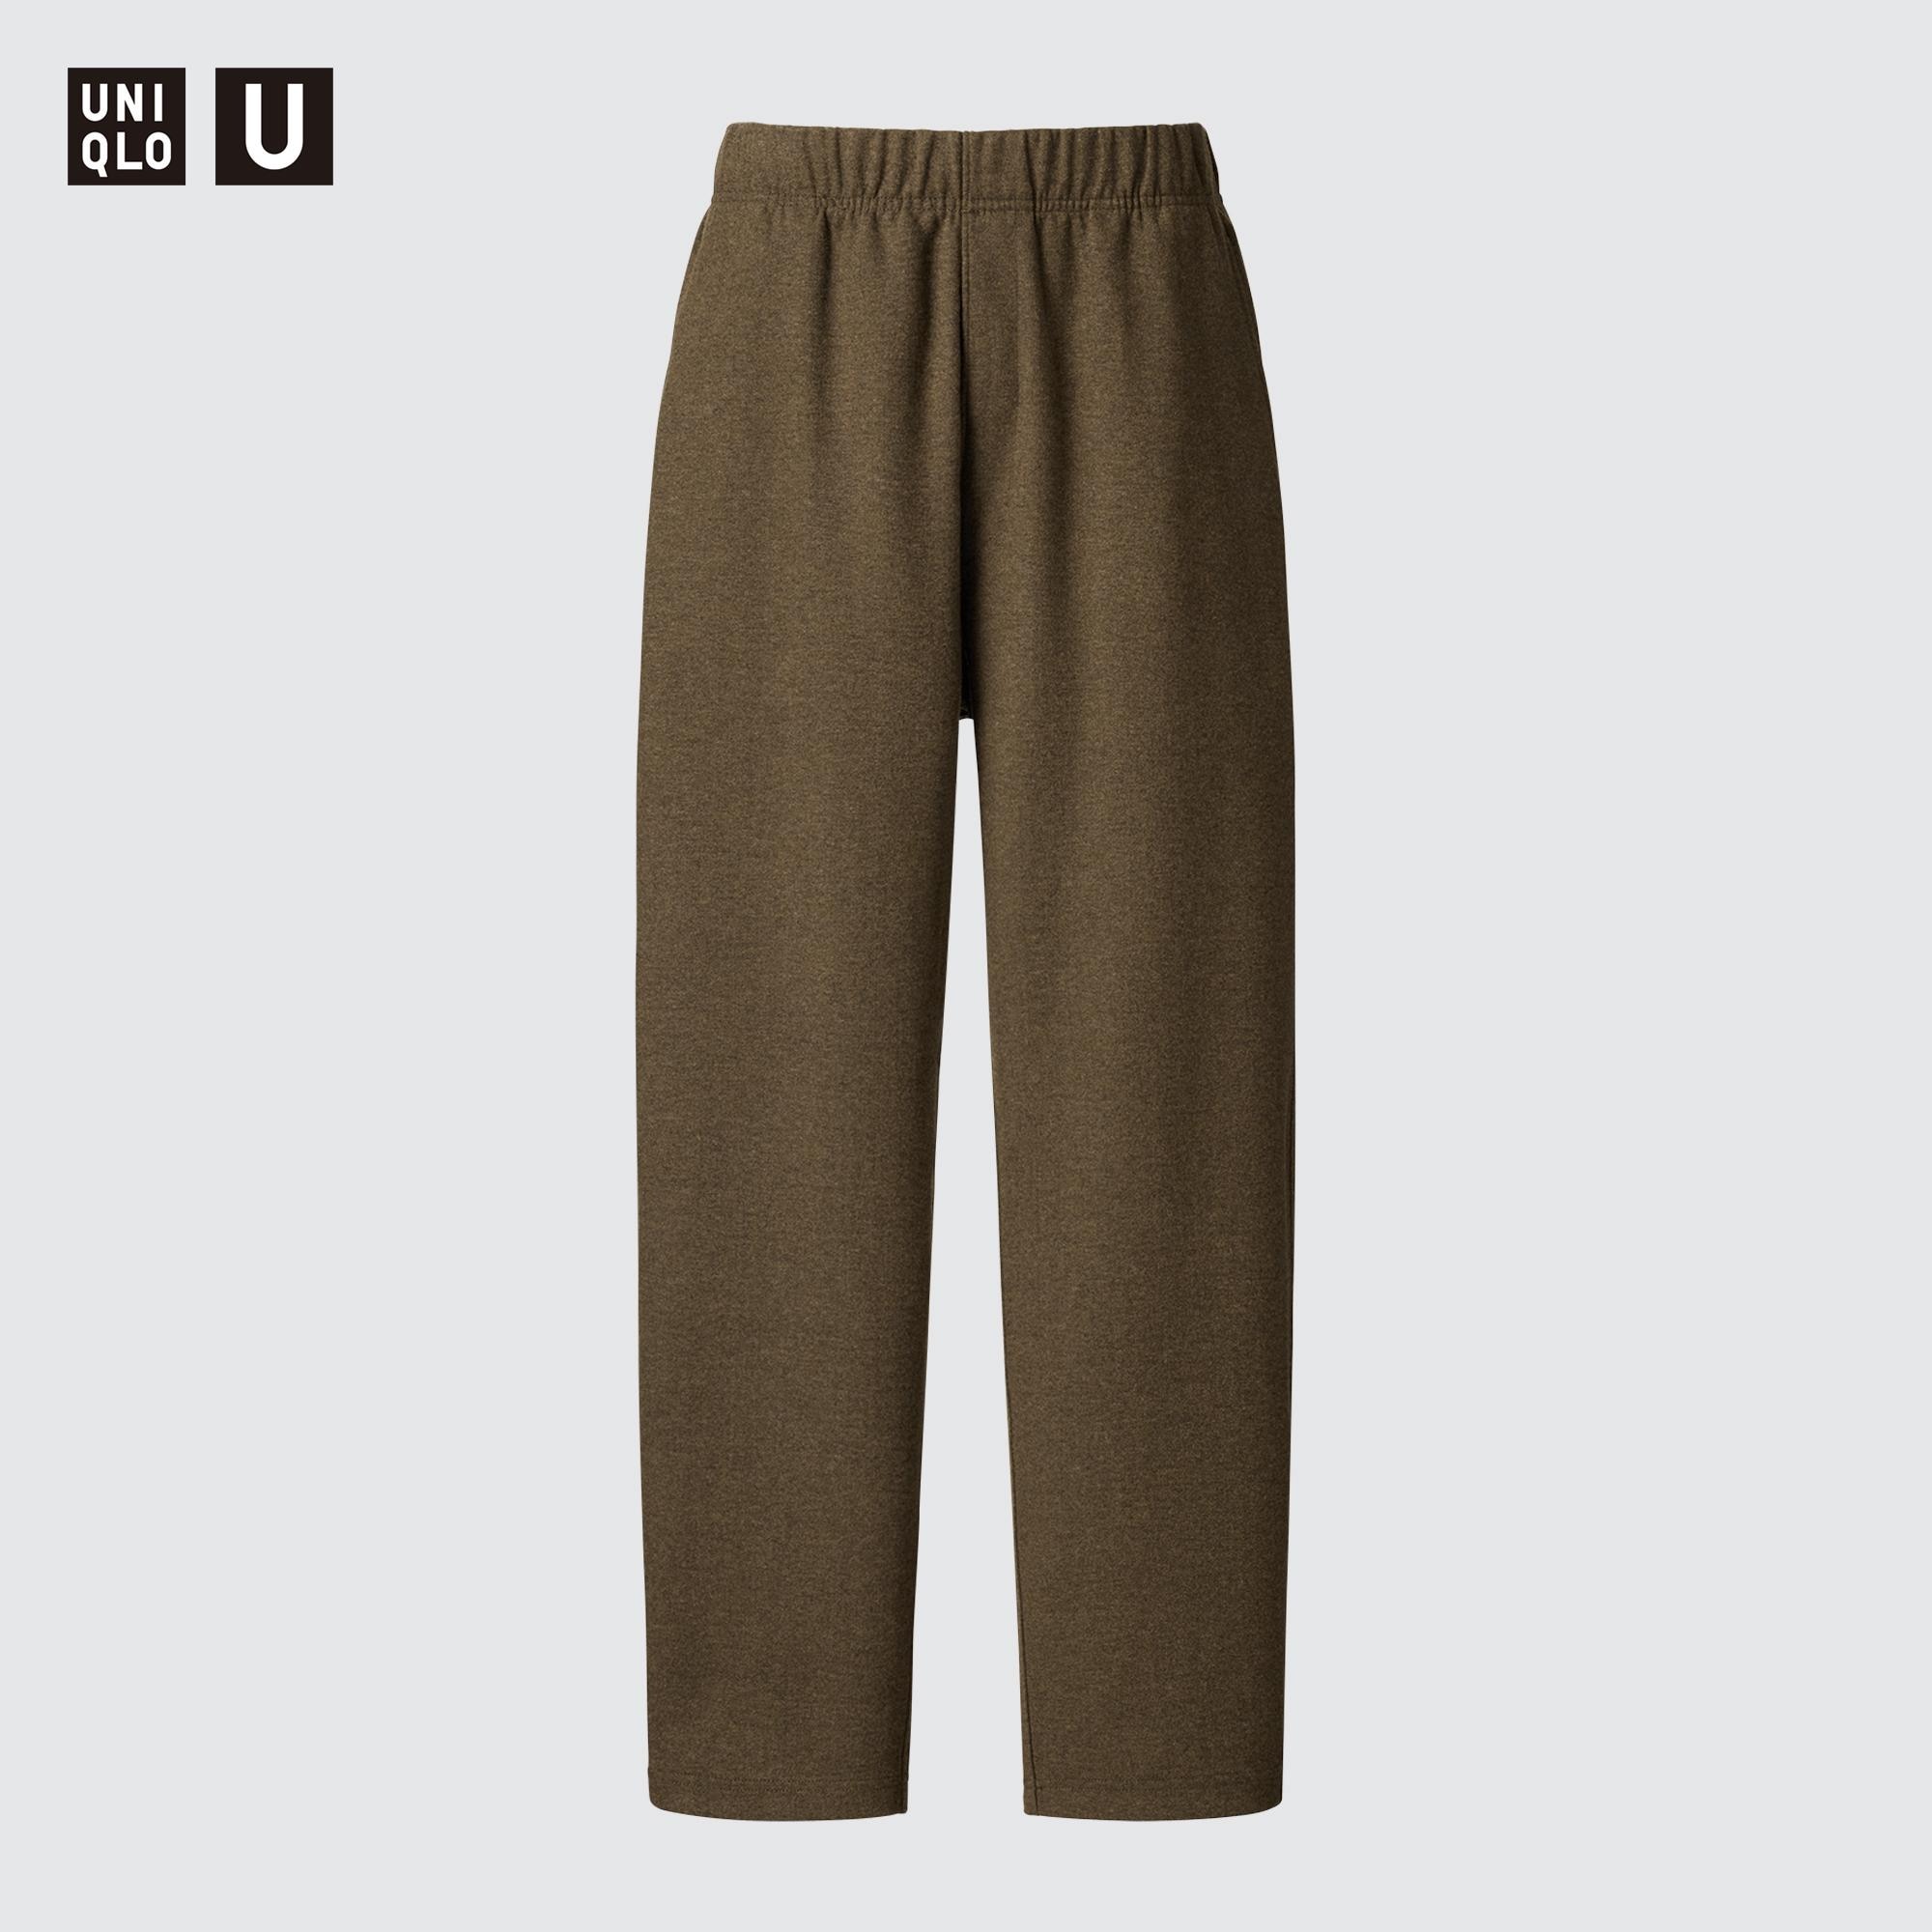 M100 Pant - Brown Waxed Cotton/Nylon WR – s.k. manor hill